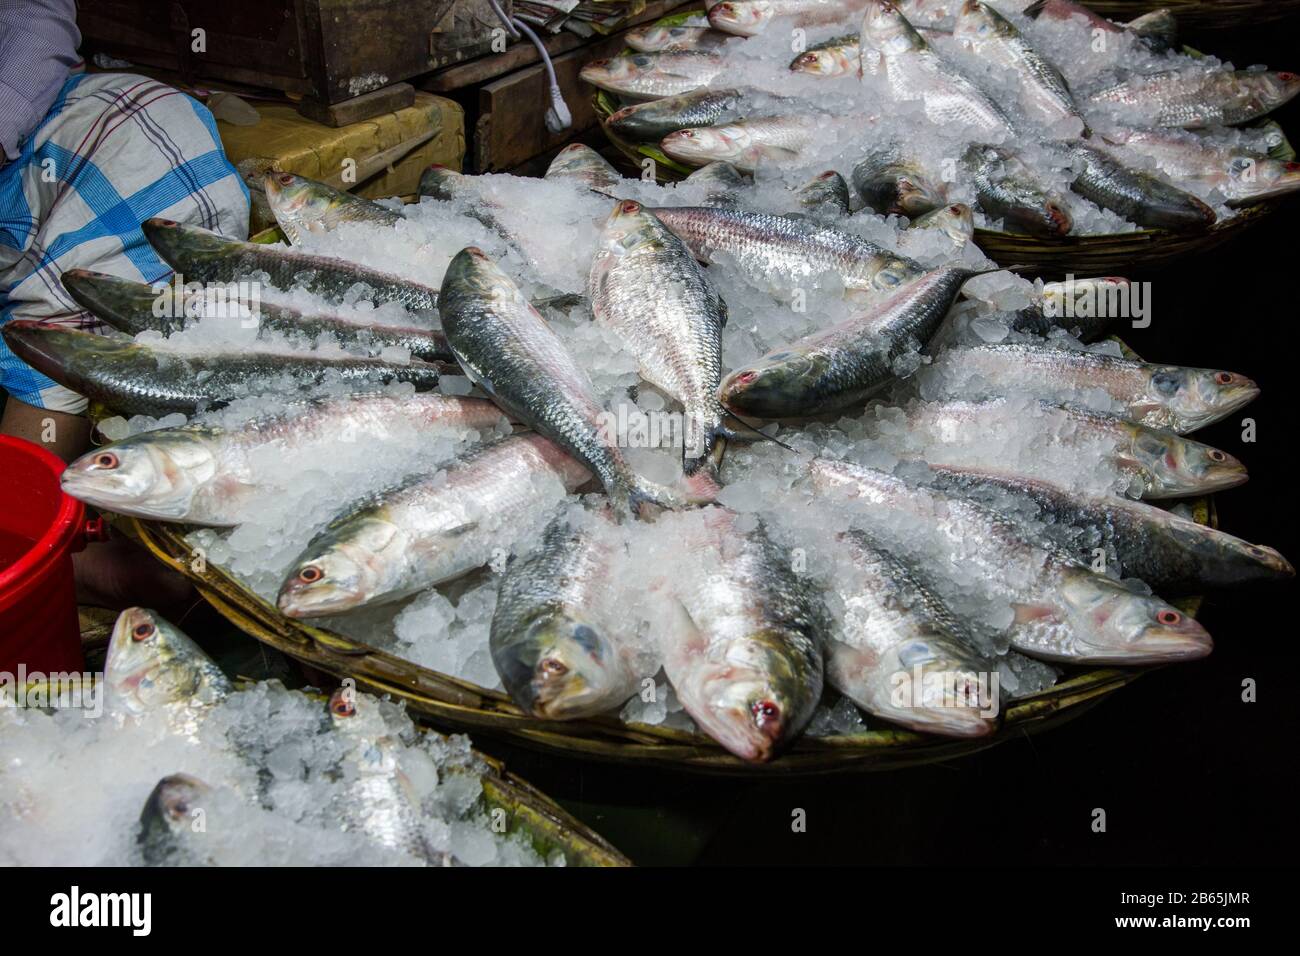 Fish is very important protein source for Bangladeshi people and it also plays an important role for economy. Hilsa is one of popular among them. Stock Photo